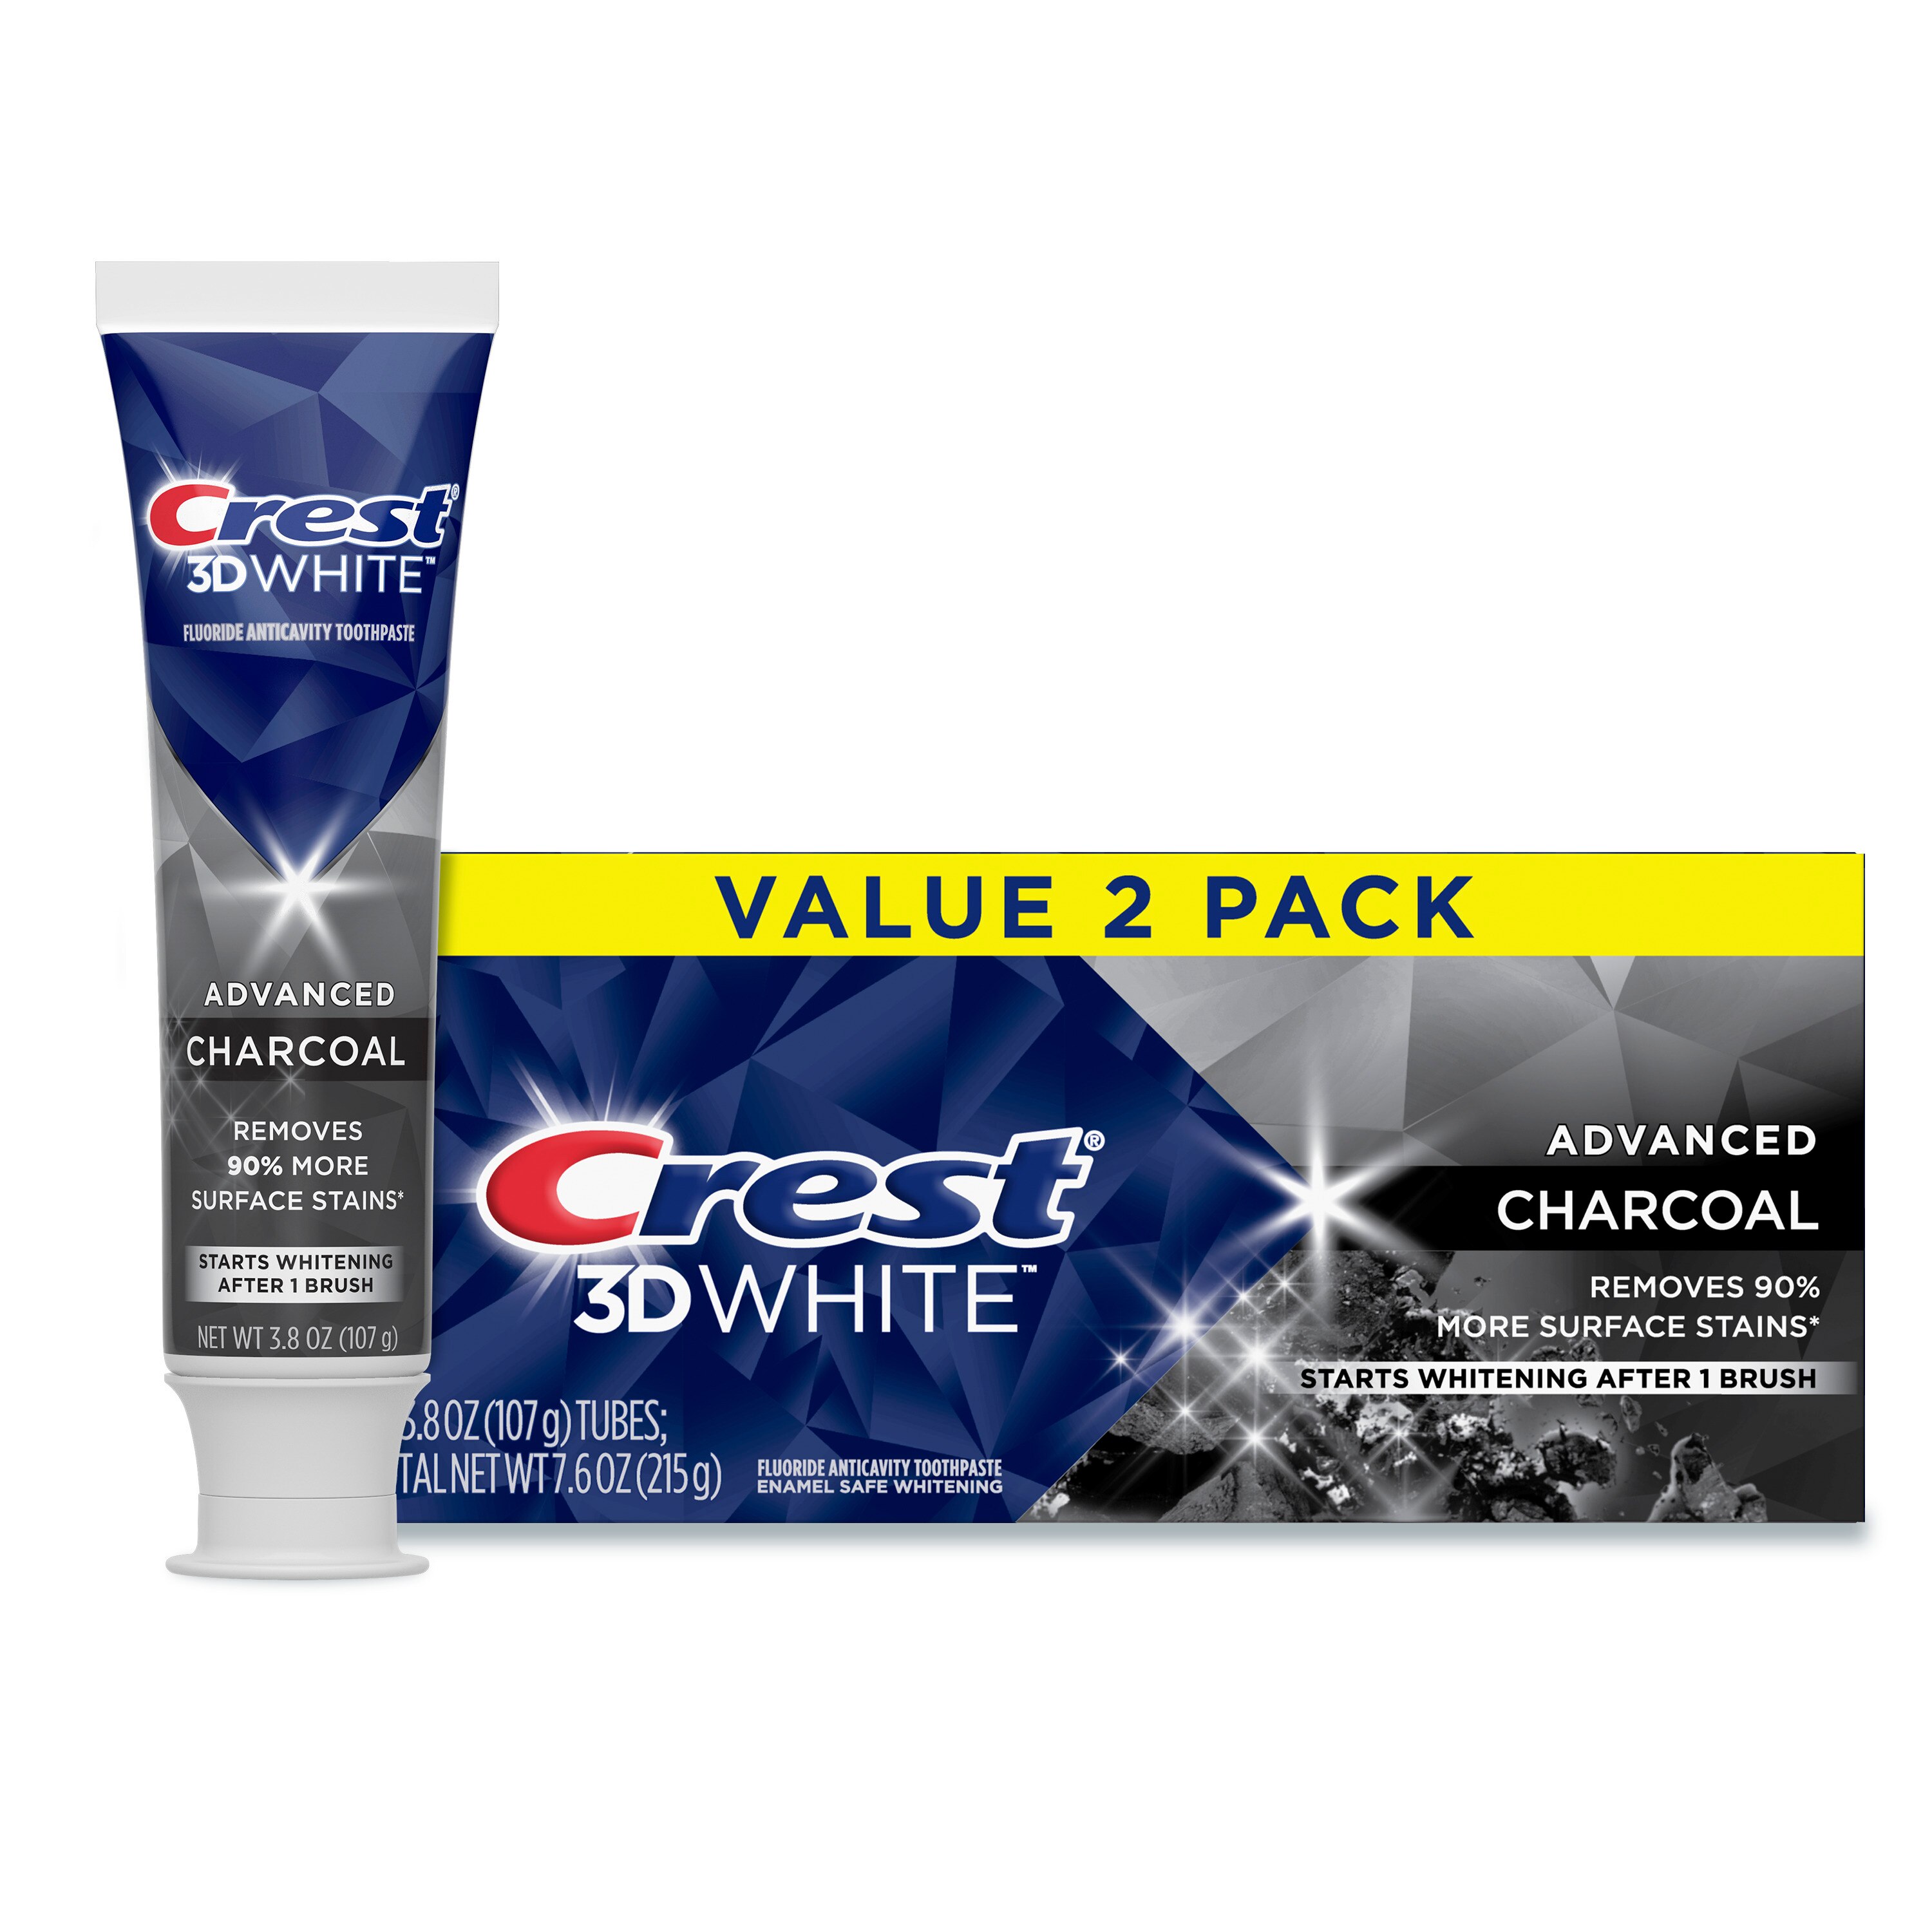 Crest 3D White Advanced Charcoal Teeth Whitening Toothpaste, 5.8 OZ 2 Pack